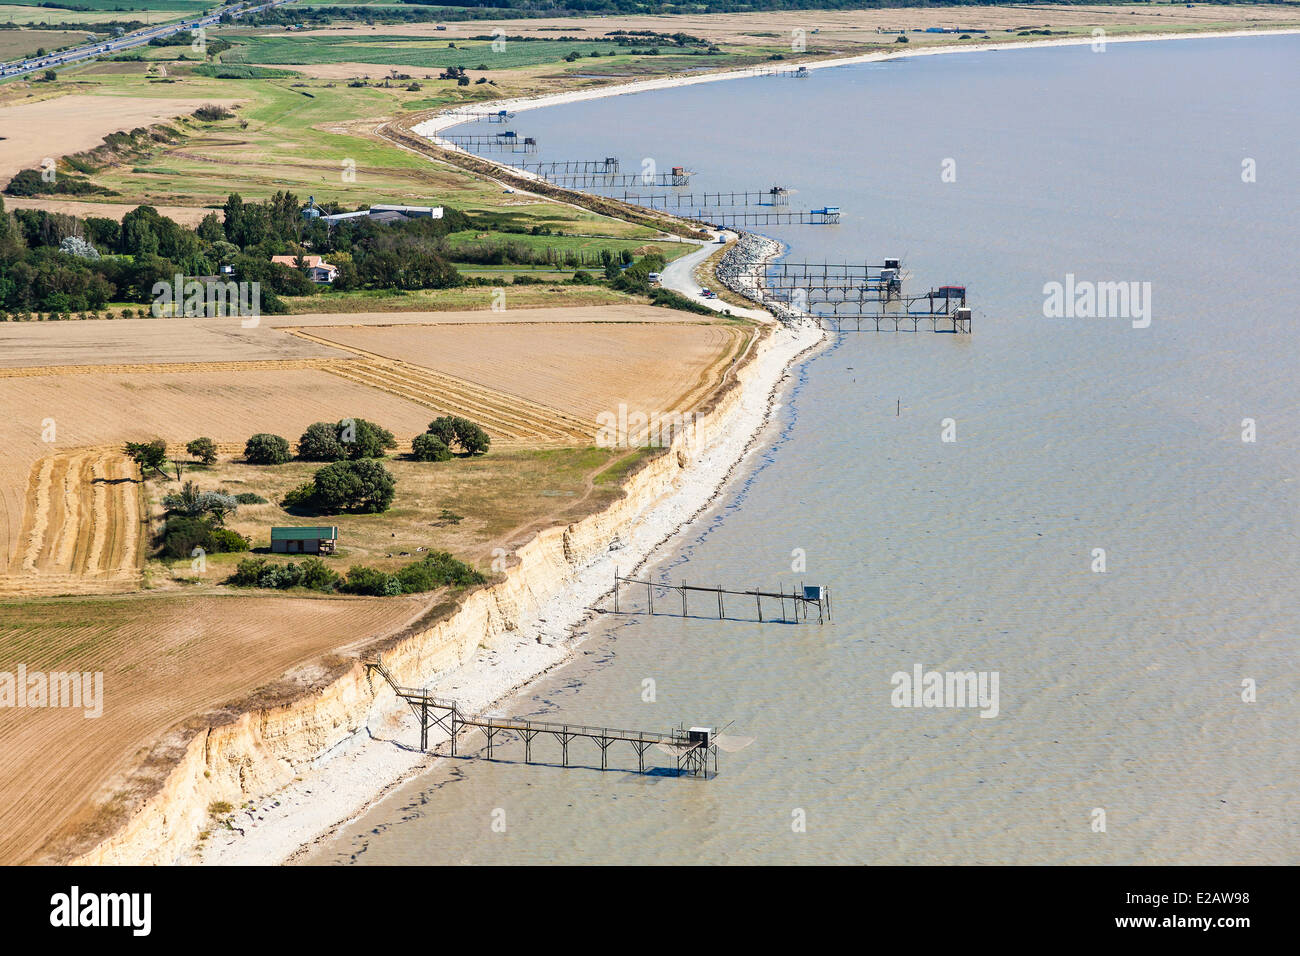 France, Charente Maritime, Yves, Anse des Boucholeurs, fisheries (aerial view) Stock Photo